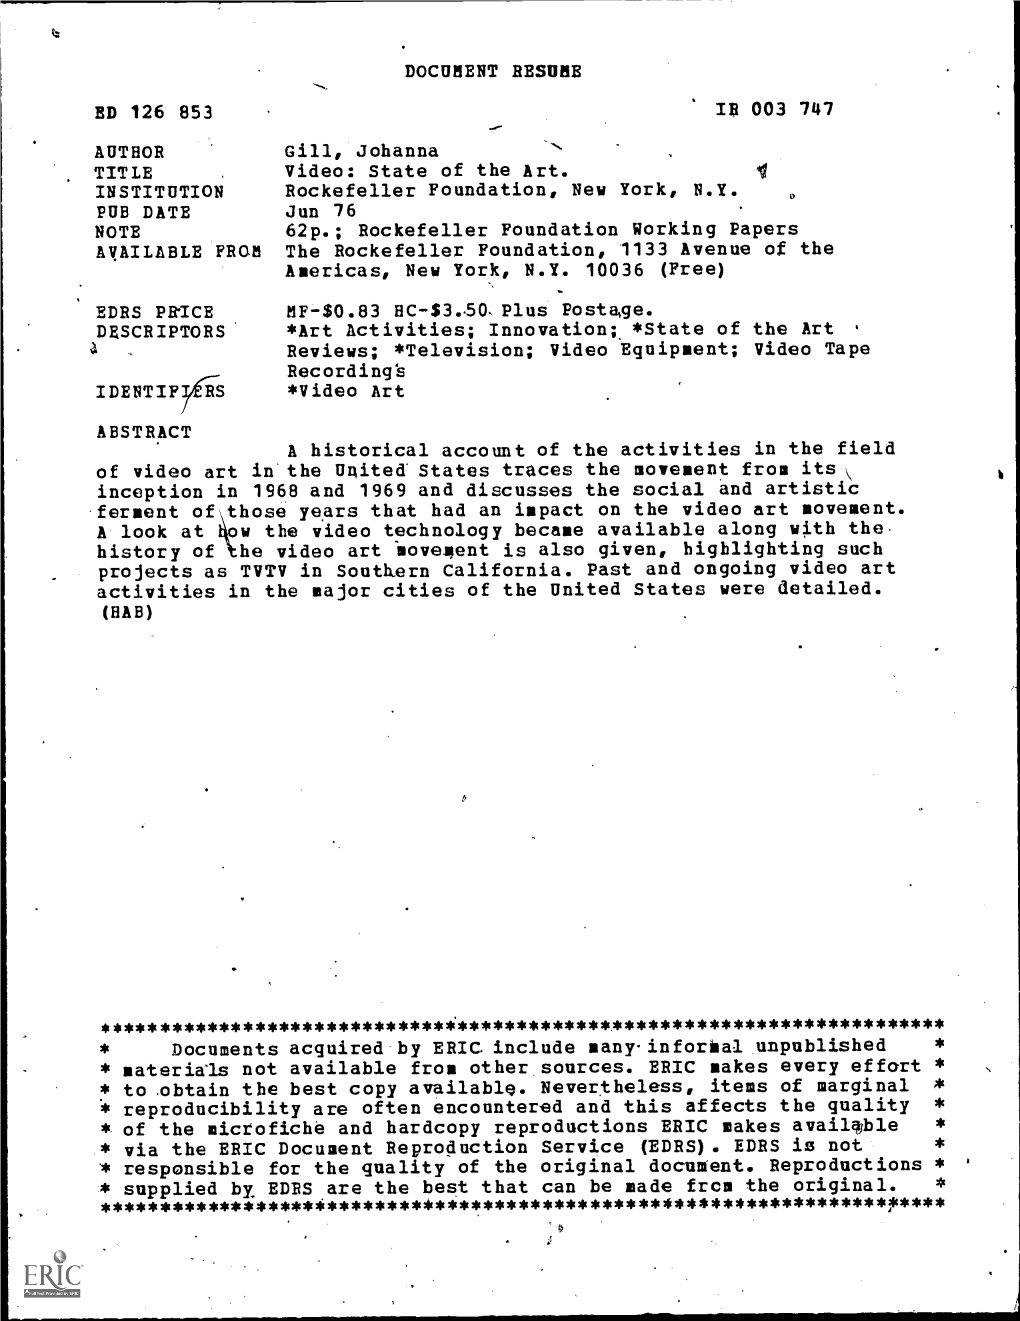 Documents Acquired by ERIC Include Any.Inforial Unpublished * Materials Not Available from Other Sources